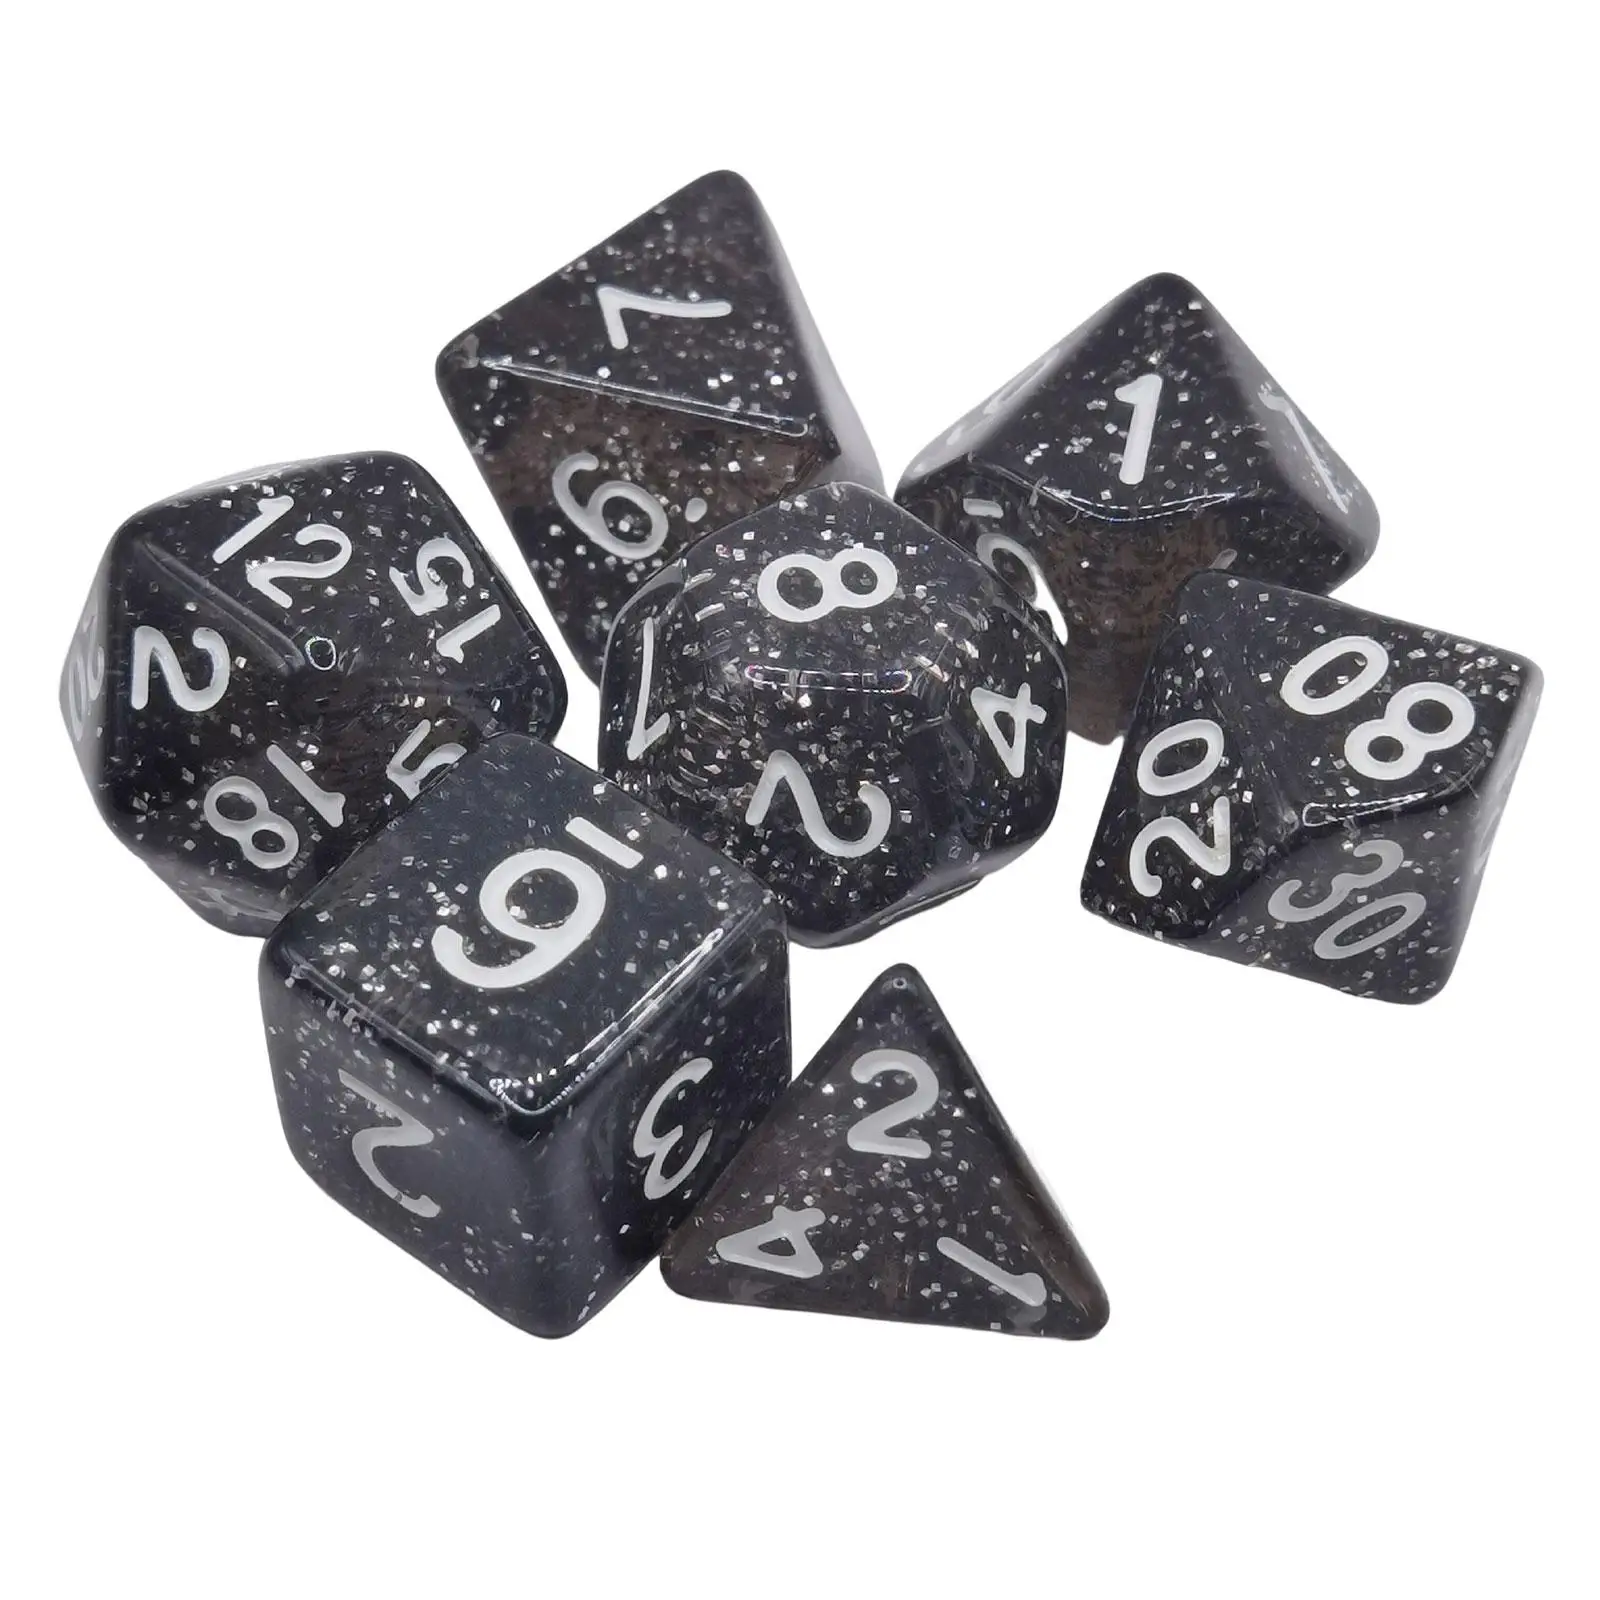 7 Pieces Polyhedral Dices Set Role Playing Game Dice for Party Supplies